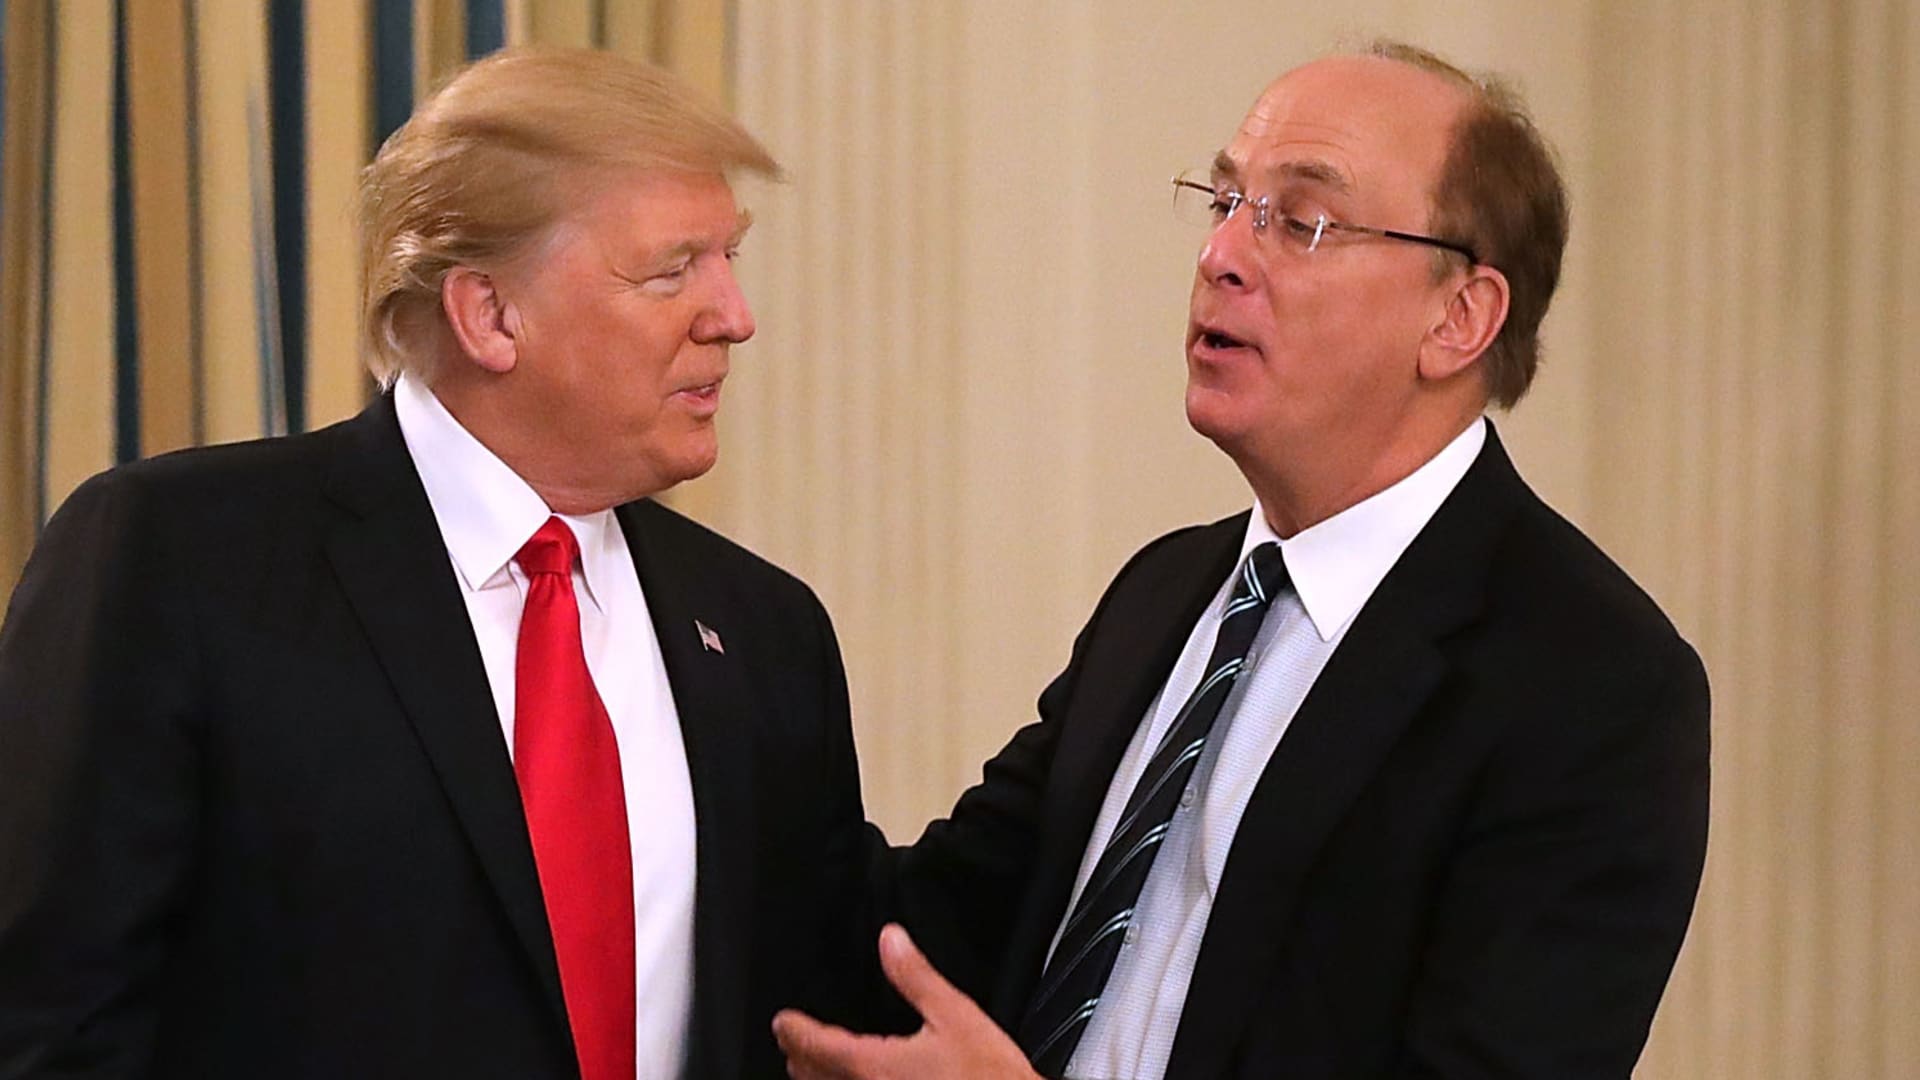 File: President Donald Trump (C) greets BlackRock CEO Larry Fink at the beginning of a policy forum in the State Dining Room at the White House February 3, 2017 in Washington, DC.